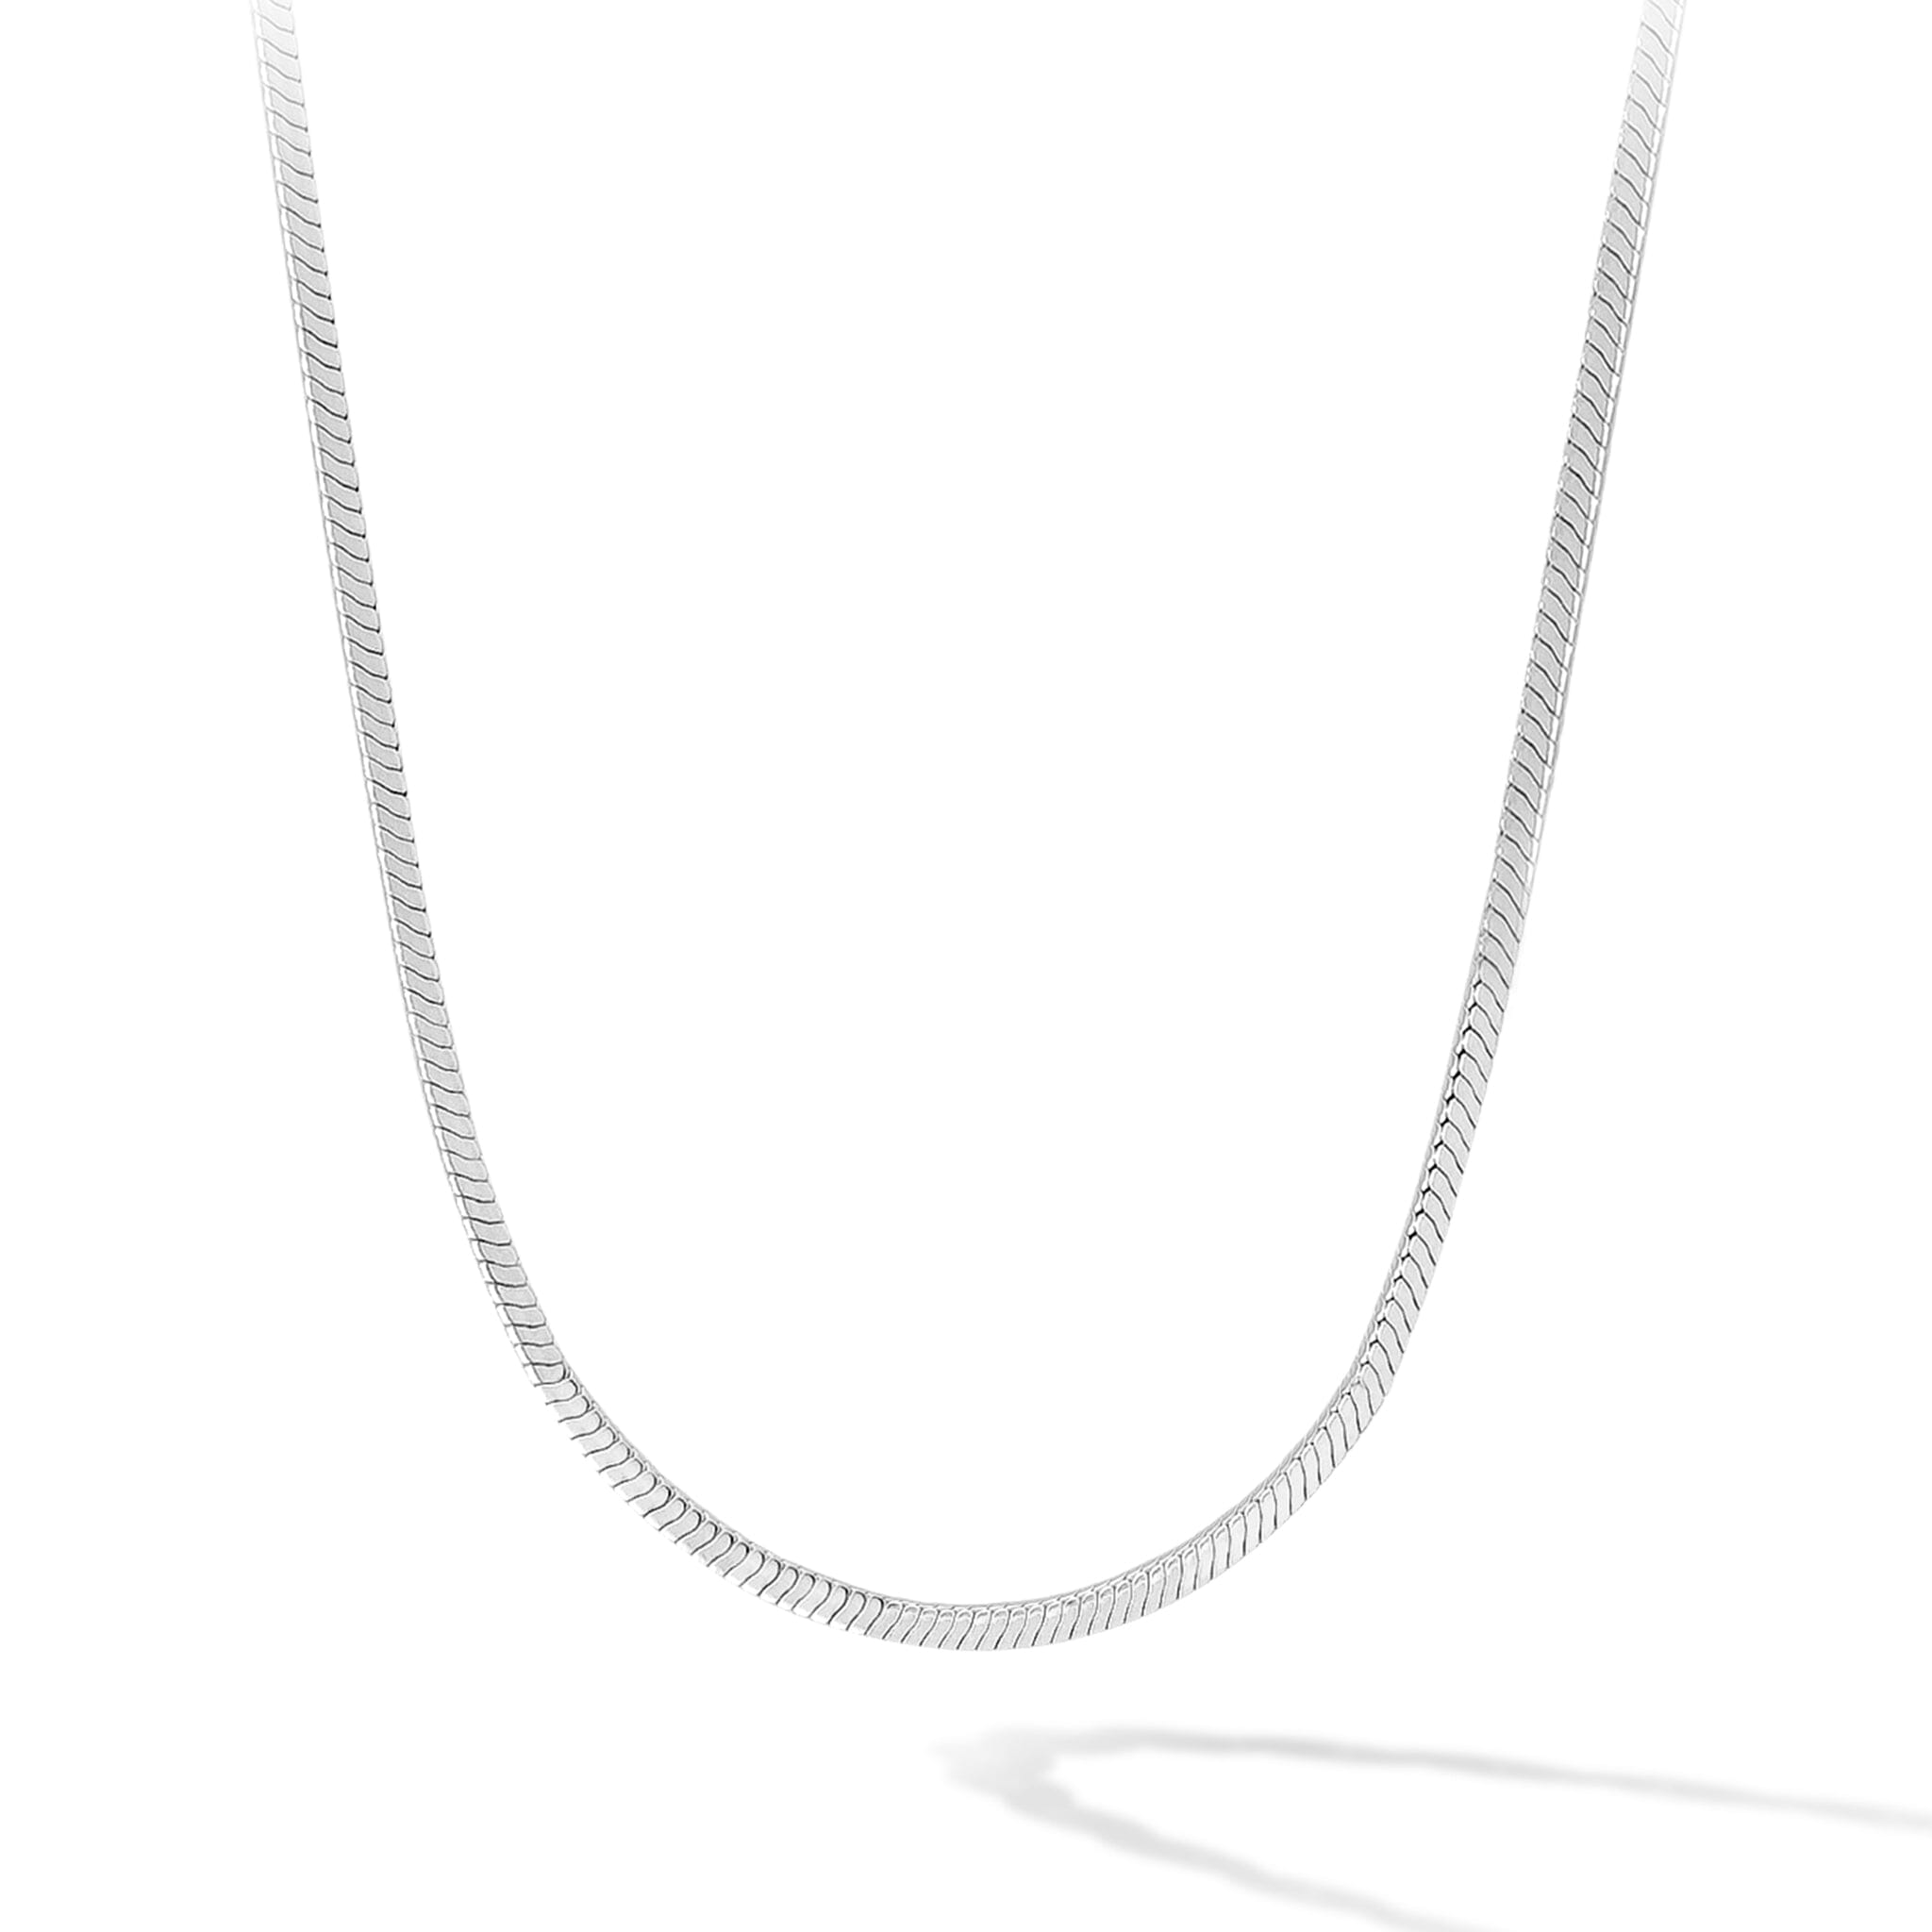 Men's Sterling Silver Classic Snake Chain Chains WAA FASHION GROUP 53cm 